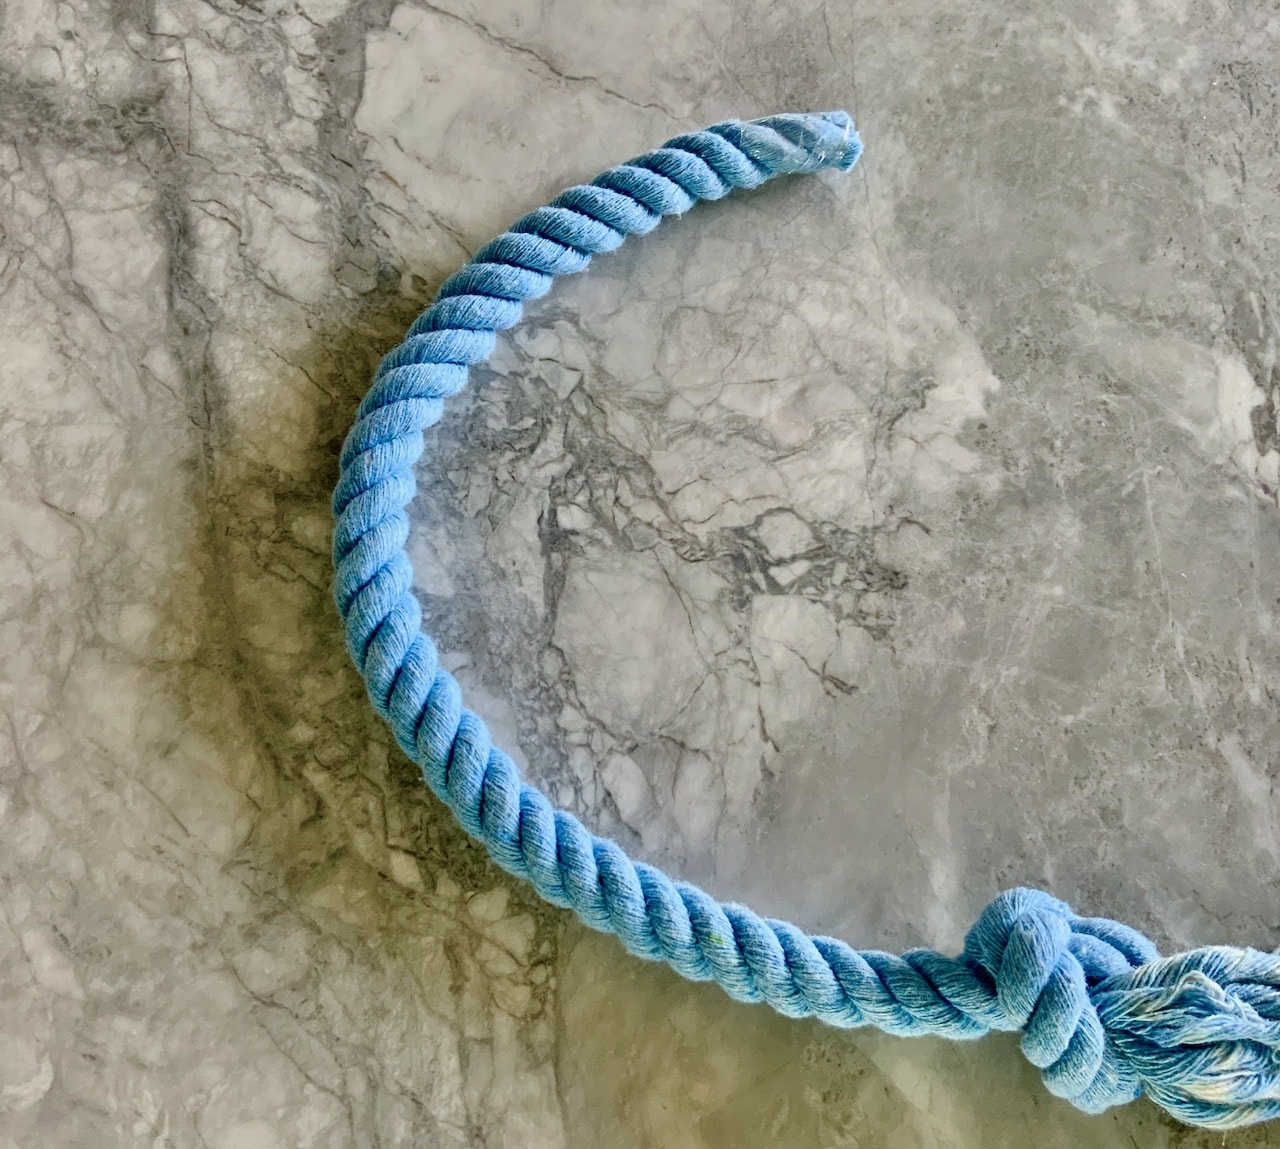 Semicircle of blue dyed rope with tape on one end and a knot on the other